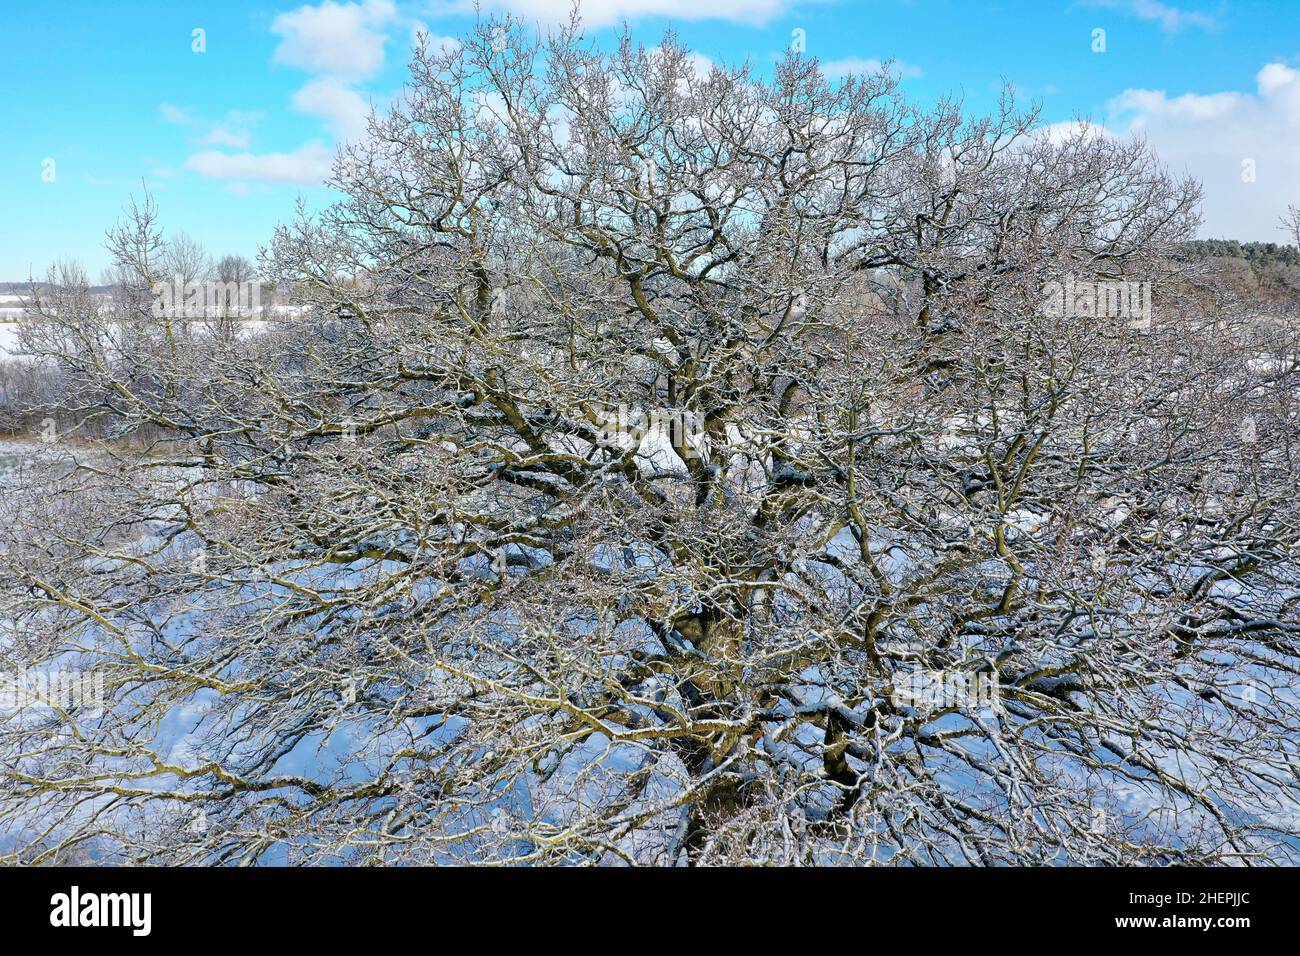 oak (Quercus spec.), drone photo from above of a leafless oak, Germany, Schleswig-Holstein Stock Photo